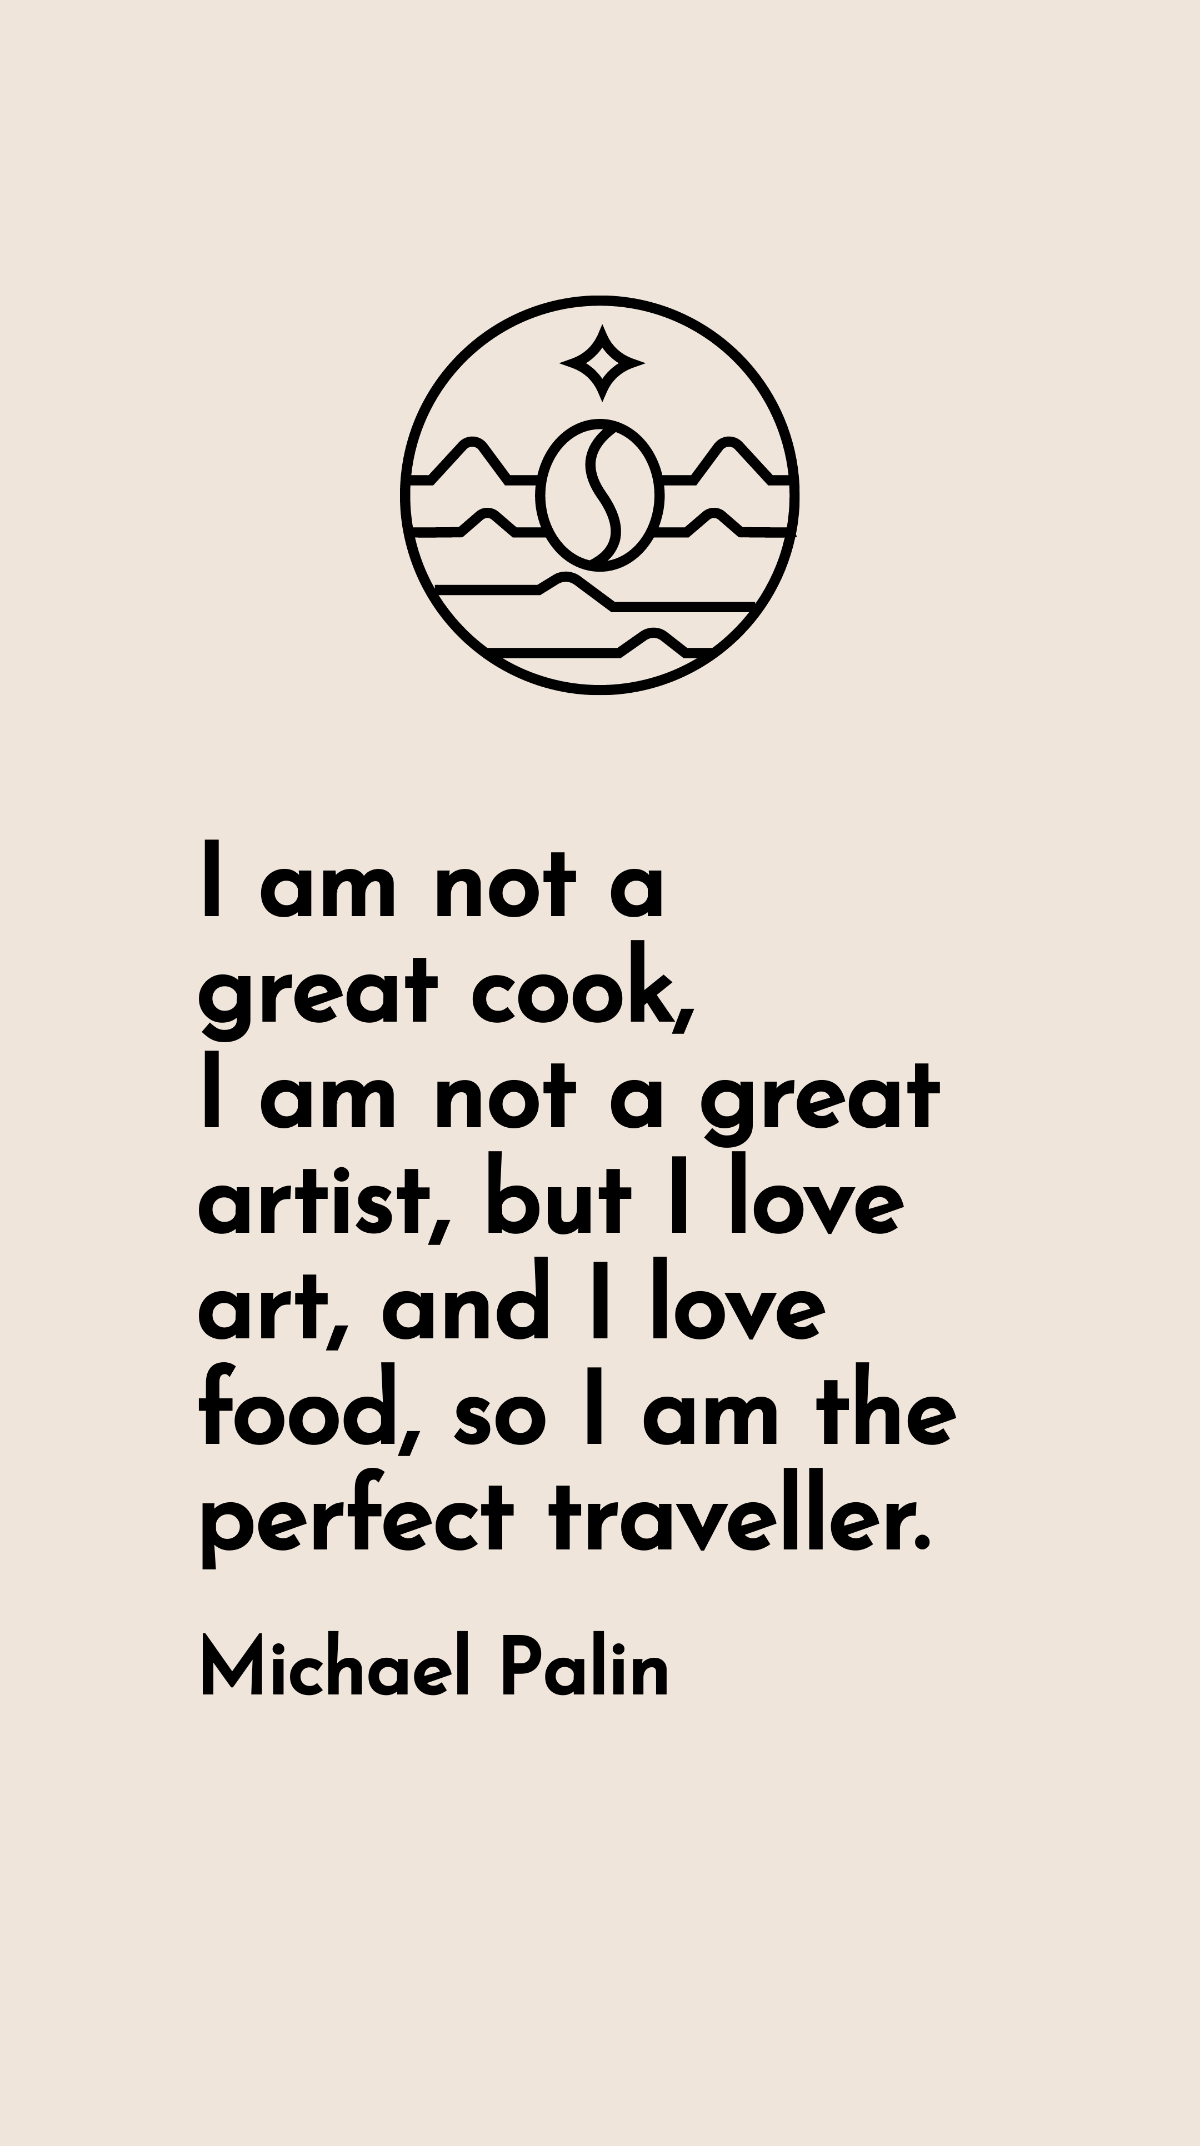 Free Michael Palin - I am not a great cook, I am not a great artist, but I love art, and I love food, so I am the perfect traveller. Template